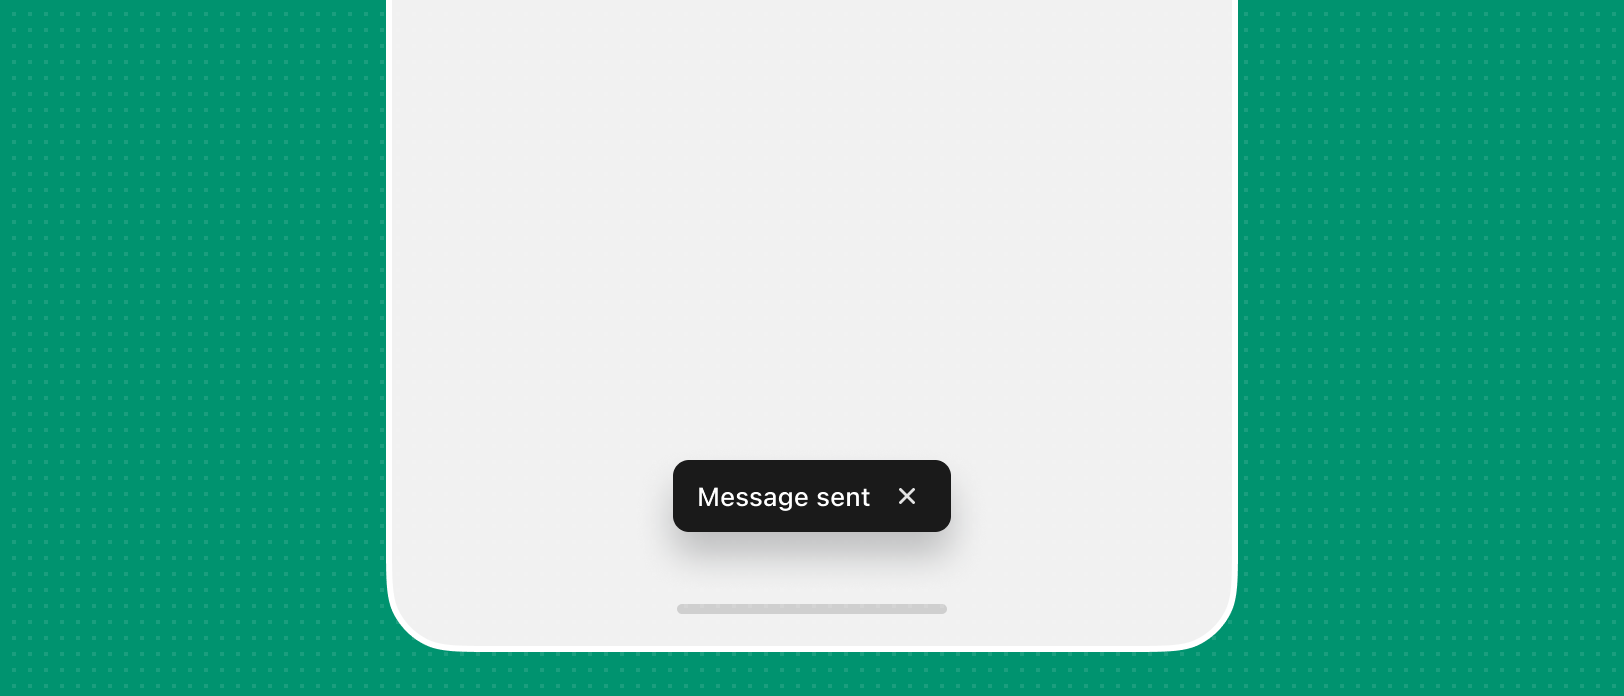 A toast placed in the bottom center of the app screen that reads ‘Message sent’.